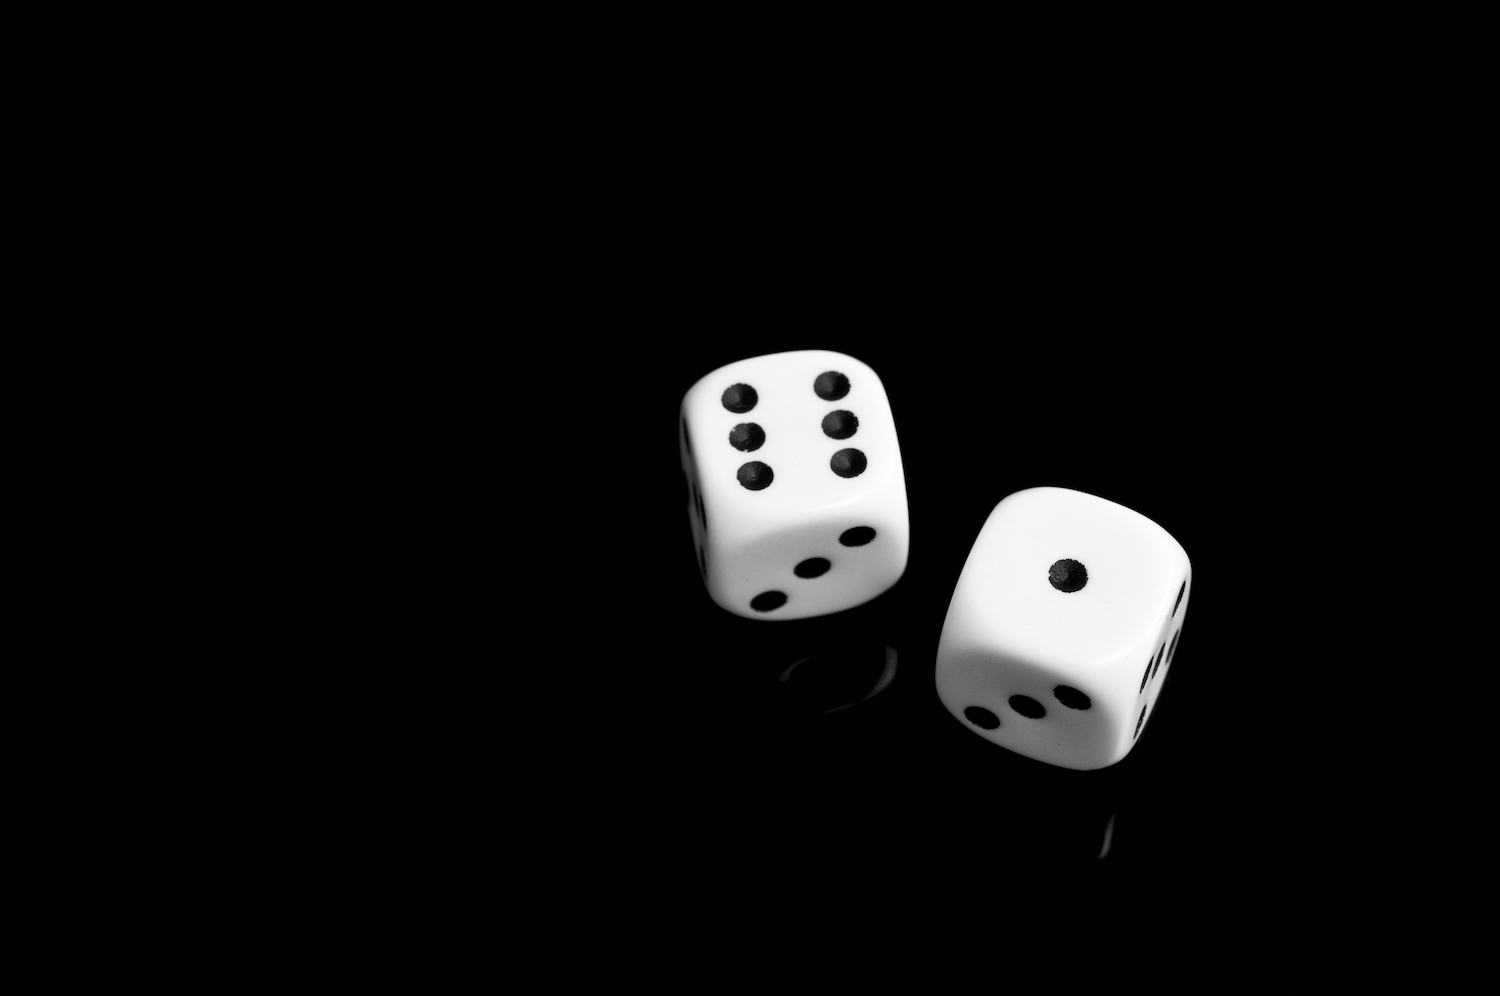 white seven dice on a black background